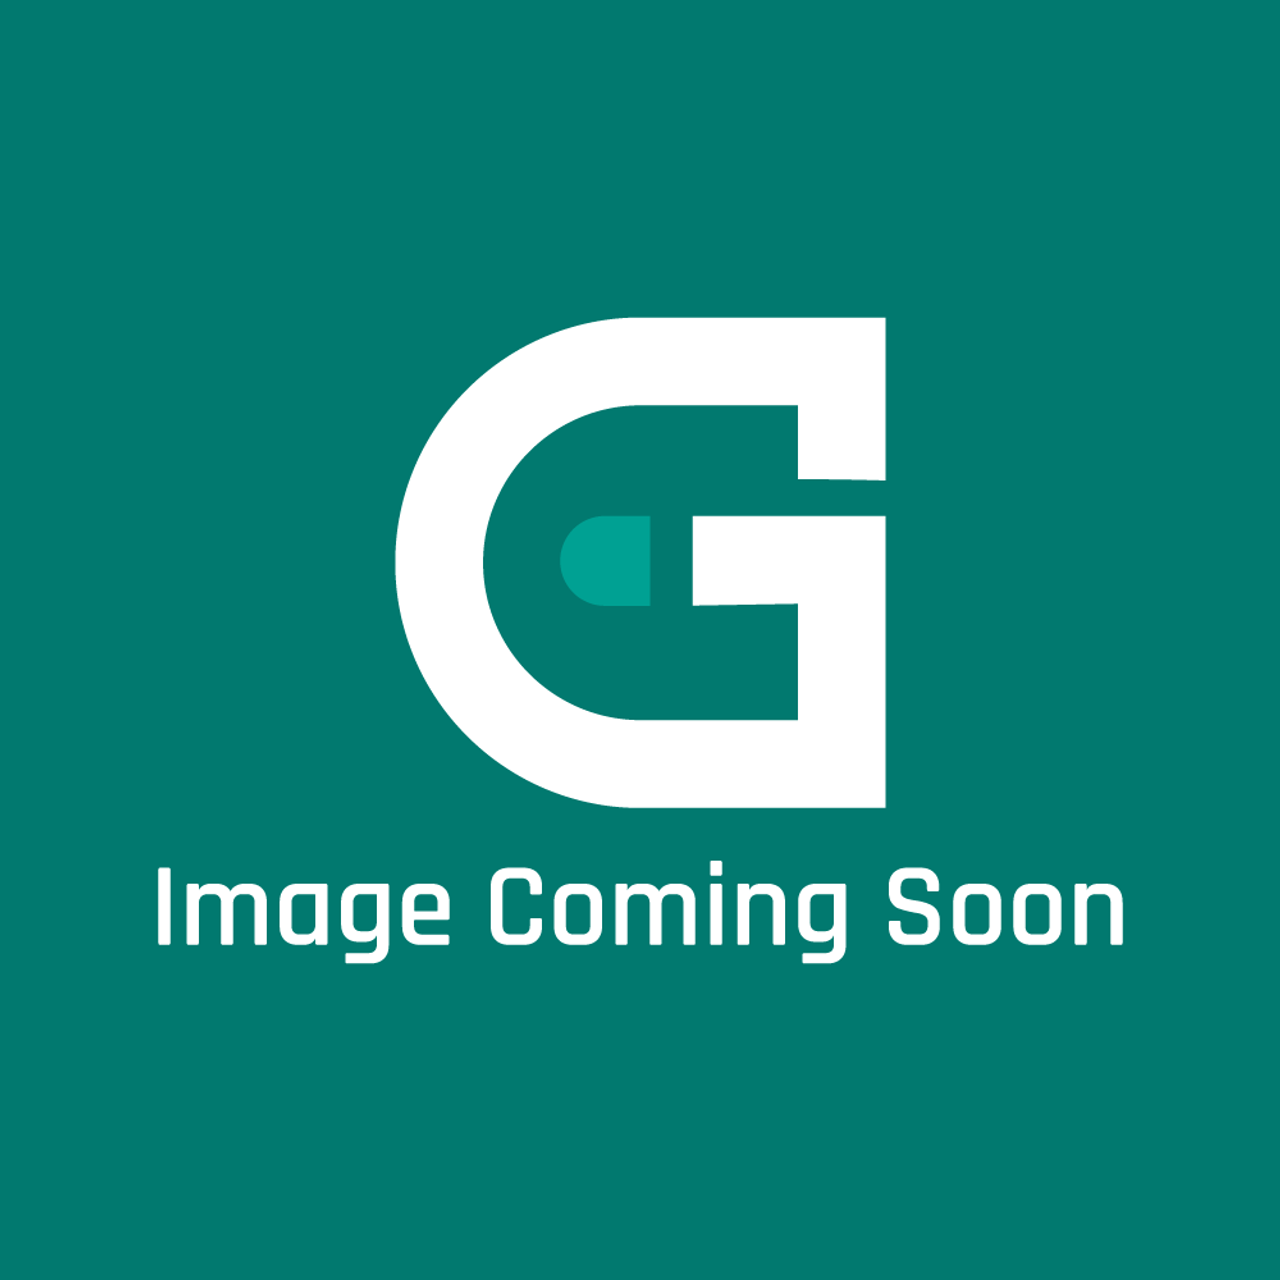 LG 3A02080A - Valve,Reverse - Image Coming Soon!